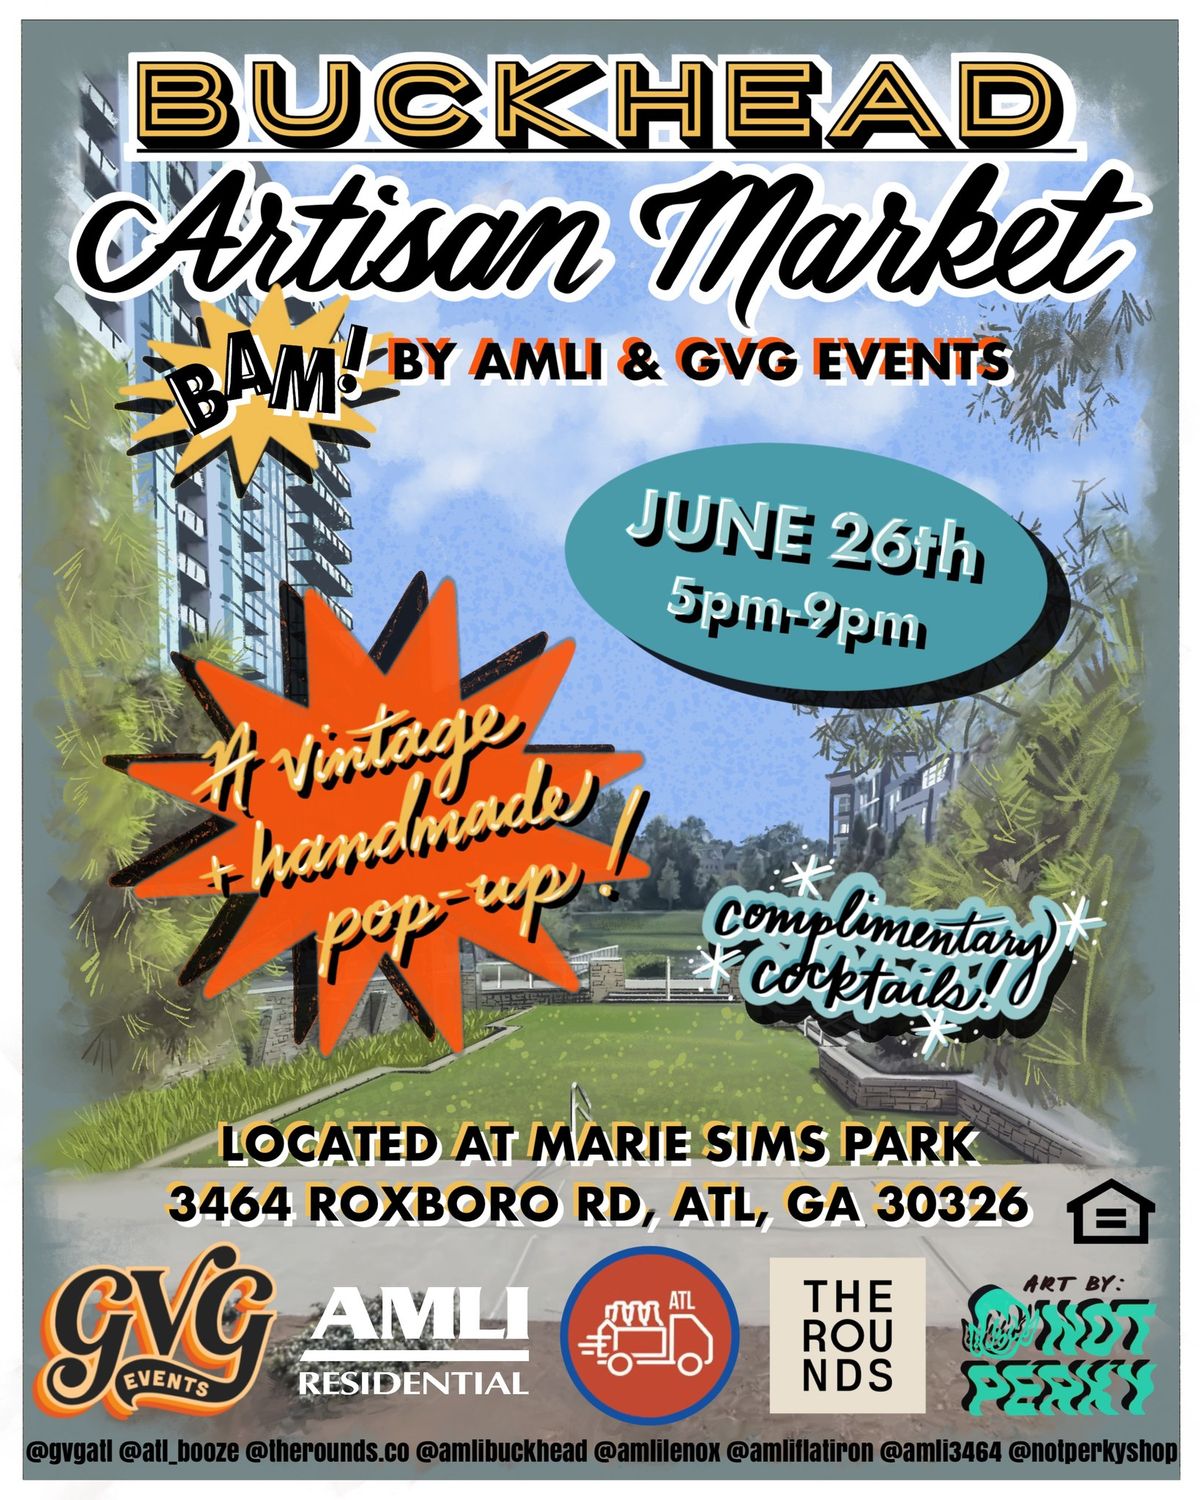 Buckhead Artisan Market by GVG Events and AMLI Residential